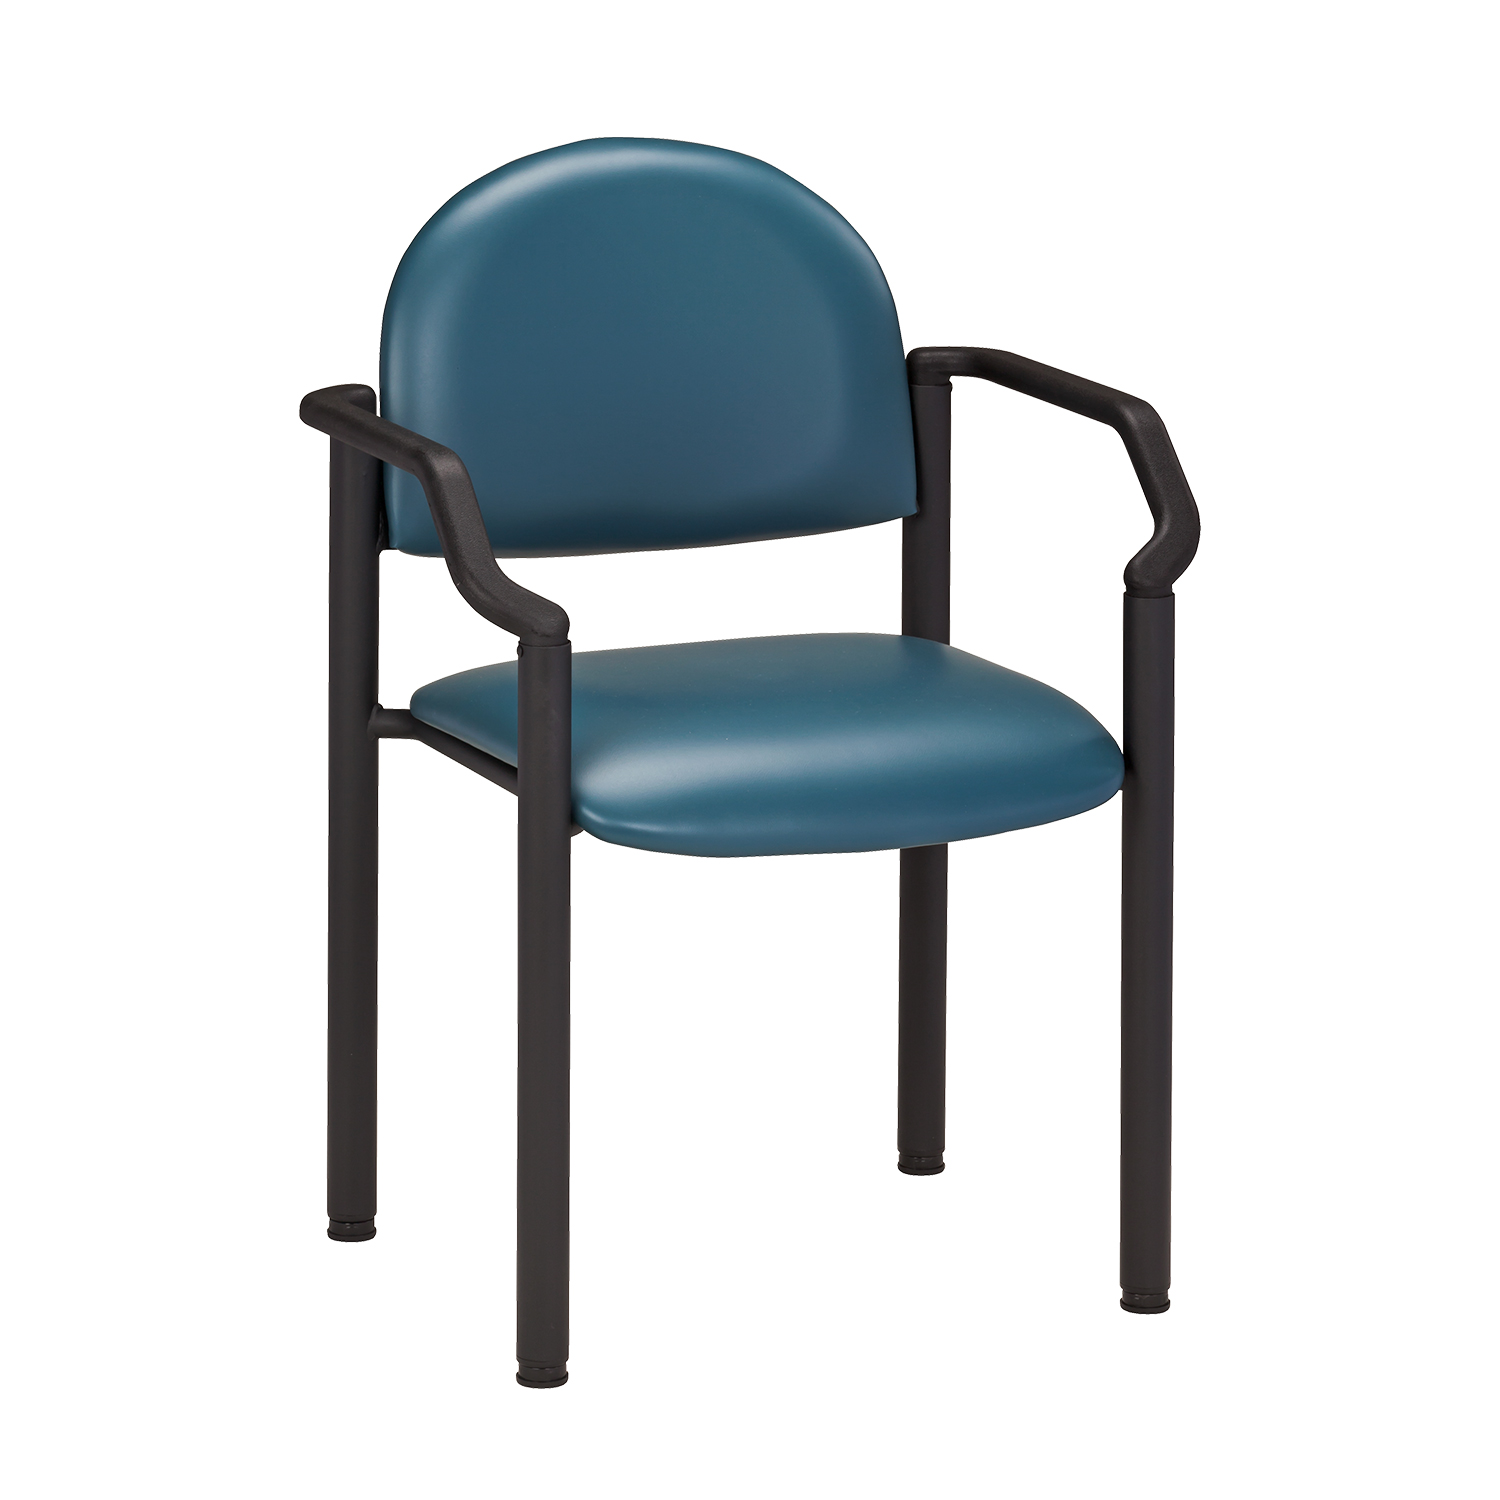 Clinton Black Frame Chair with Arms